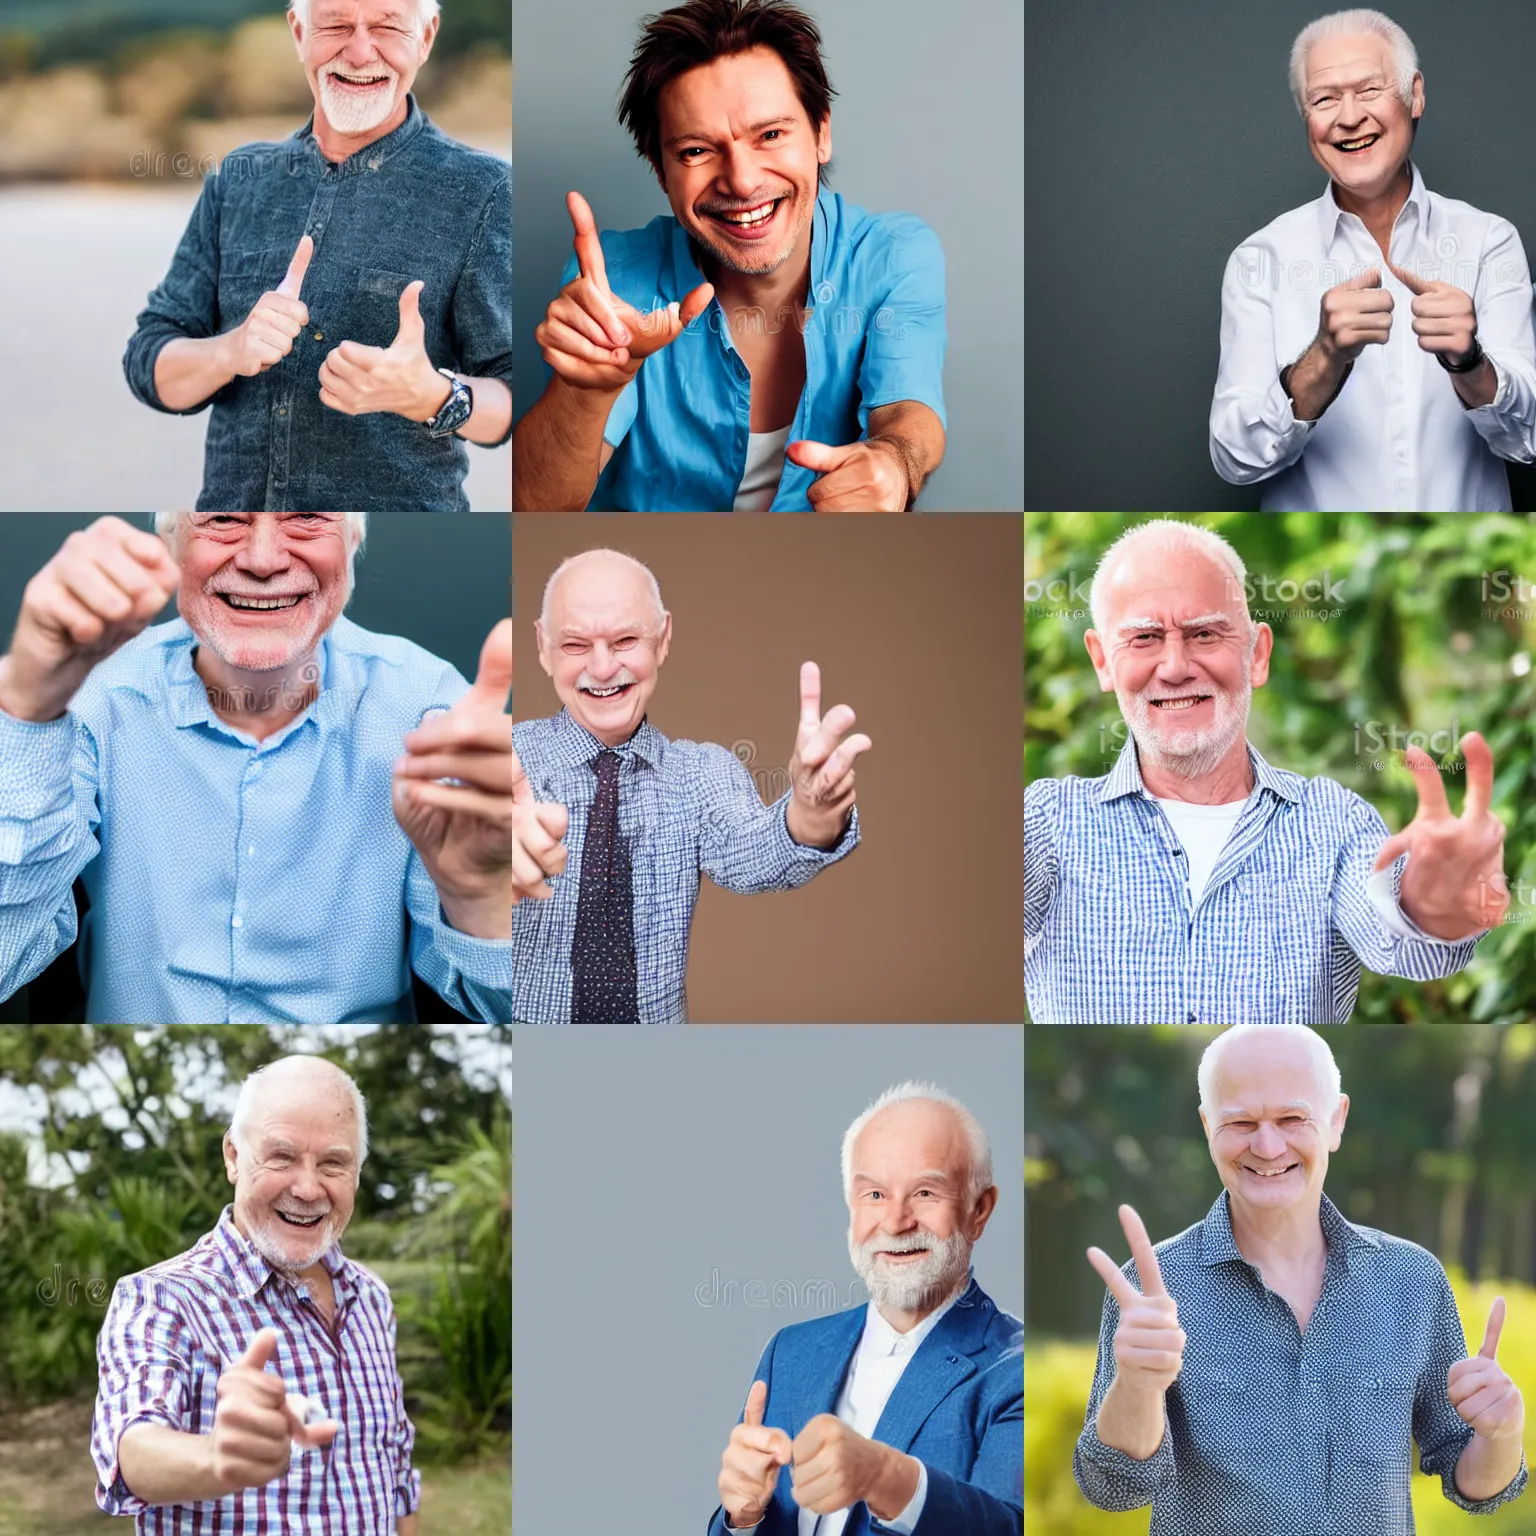 Prompt: happy looking hide the pain harold pointing his hand and index finger at the camera, white guy, handsome, stock photo, round face, smile